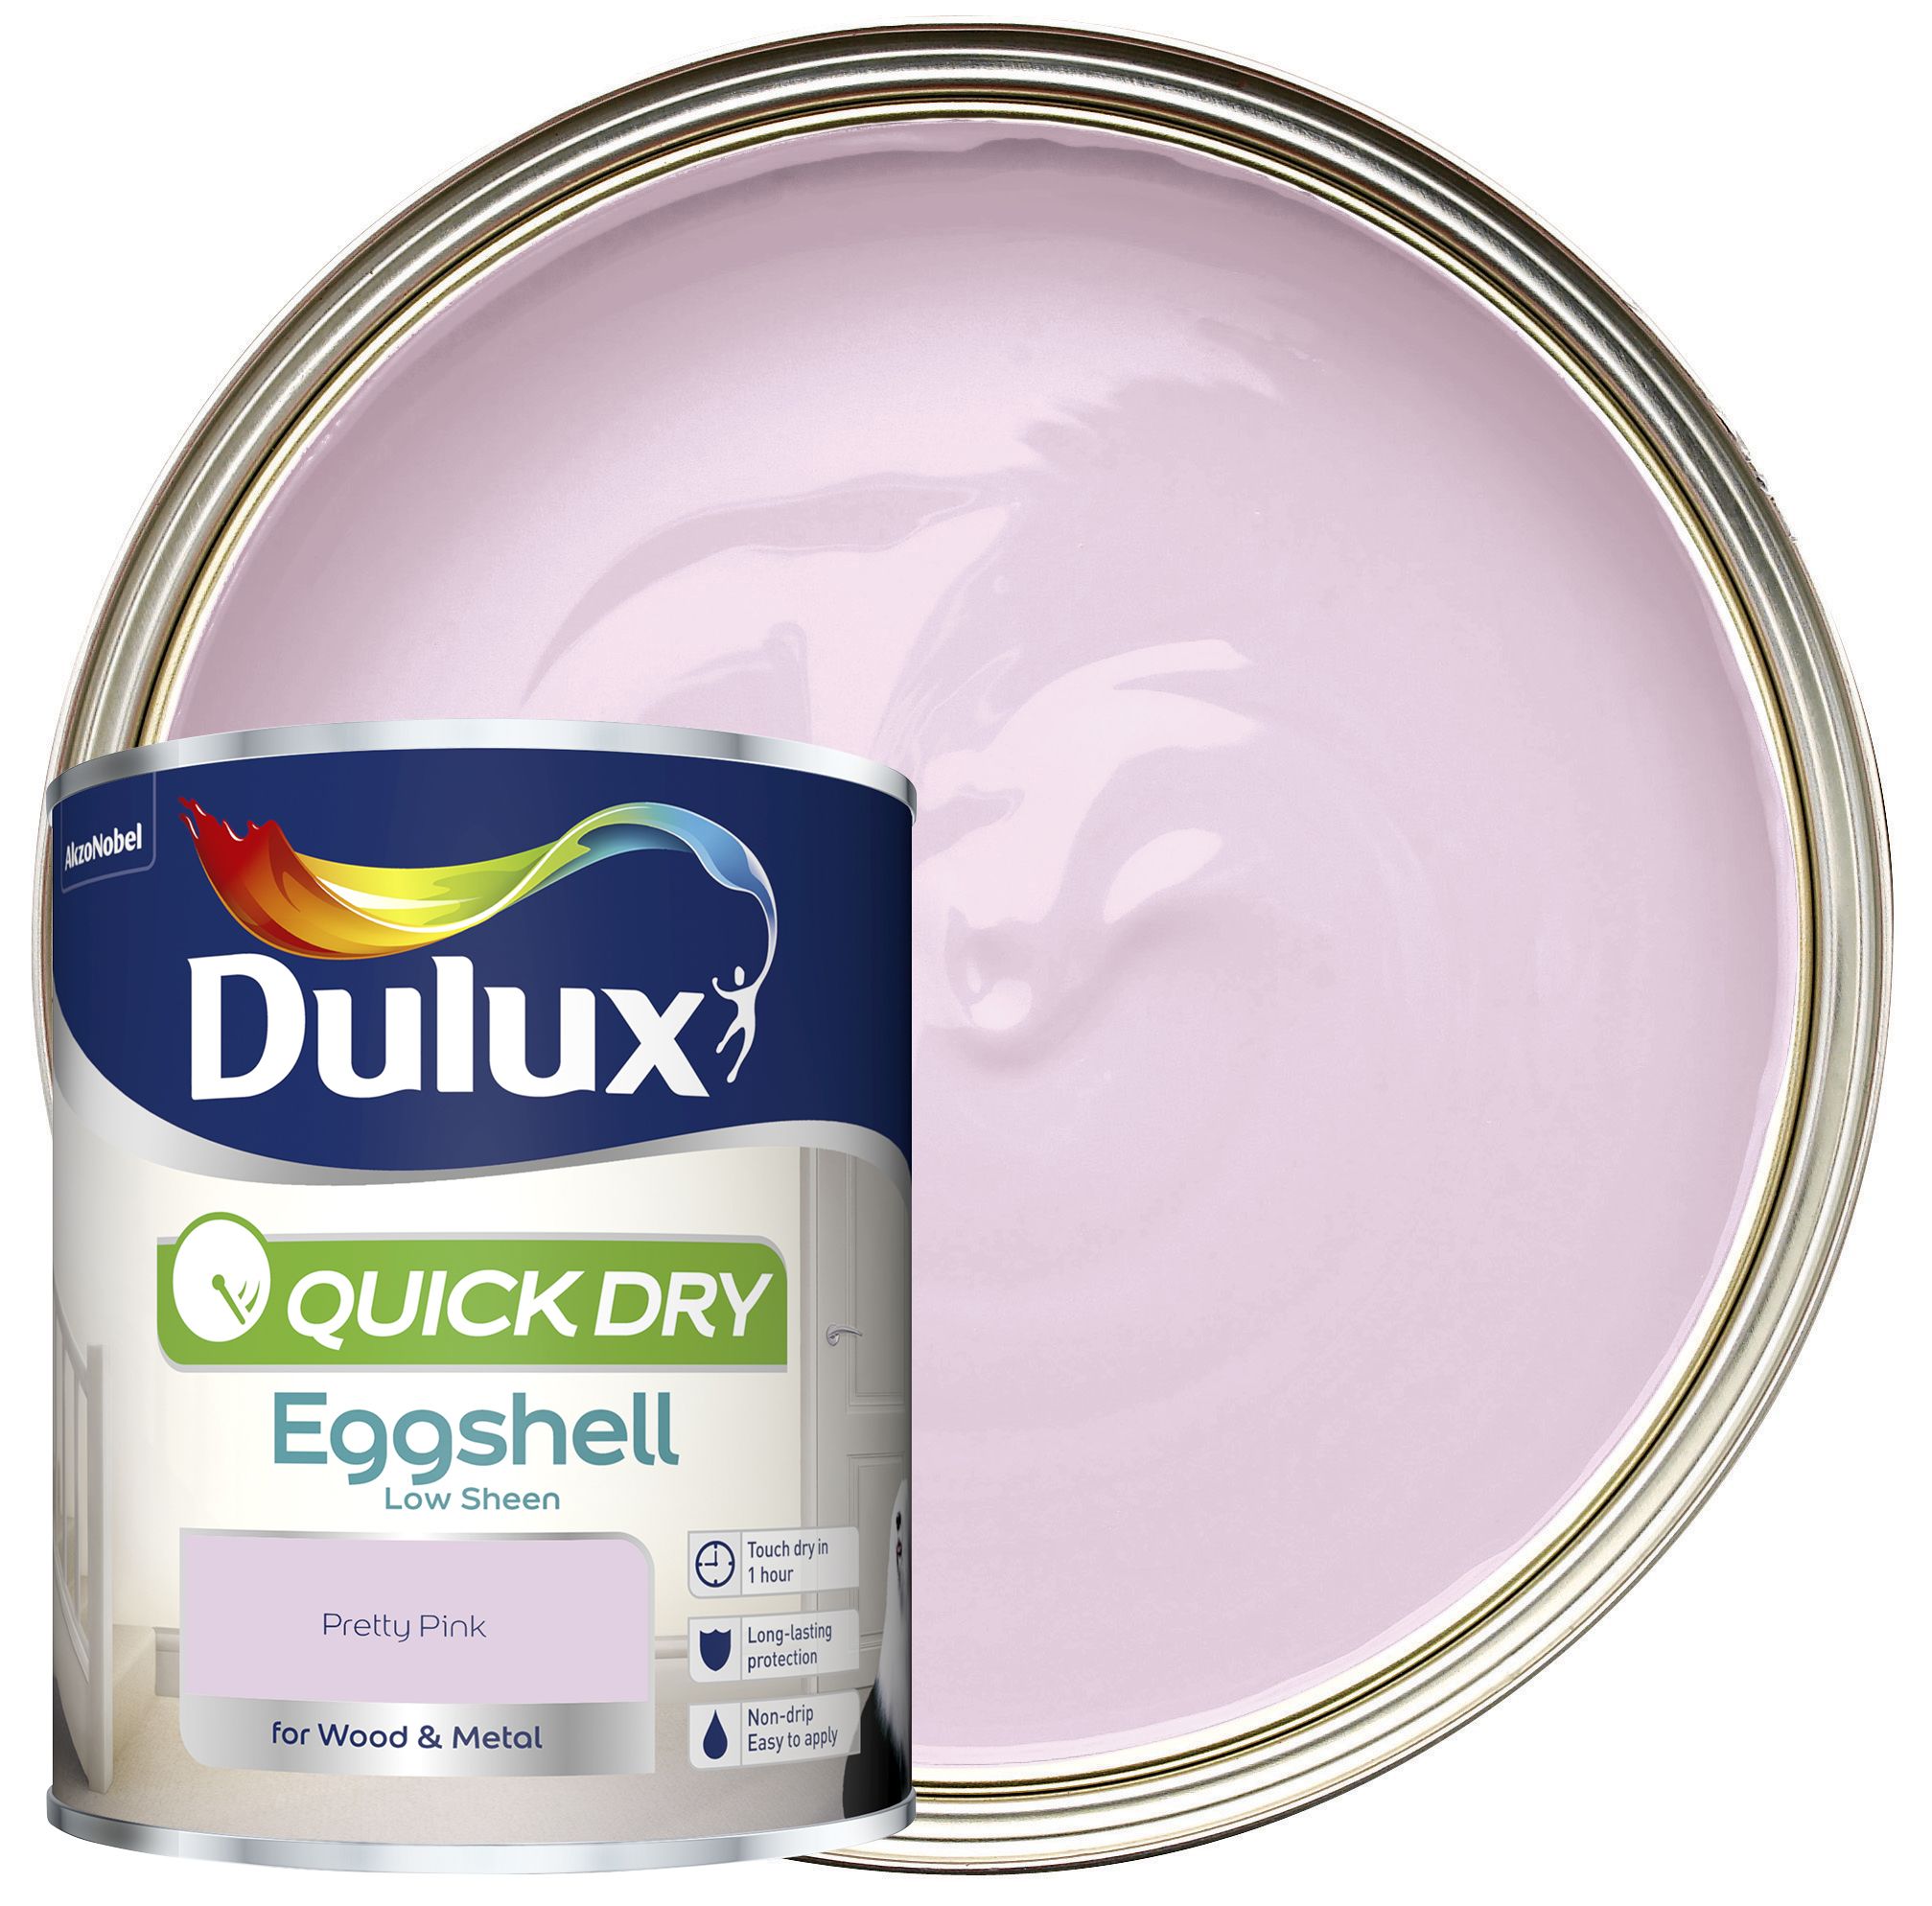 Image of Dulux Quick Drying Eggshell Paint - Pretty Pink - 750ml